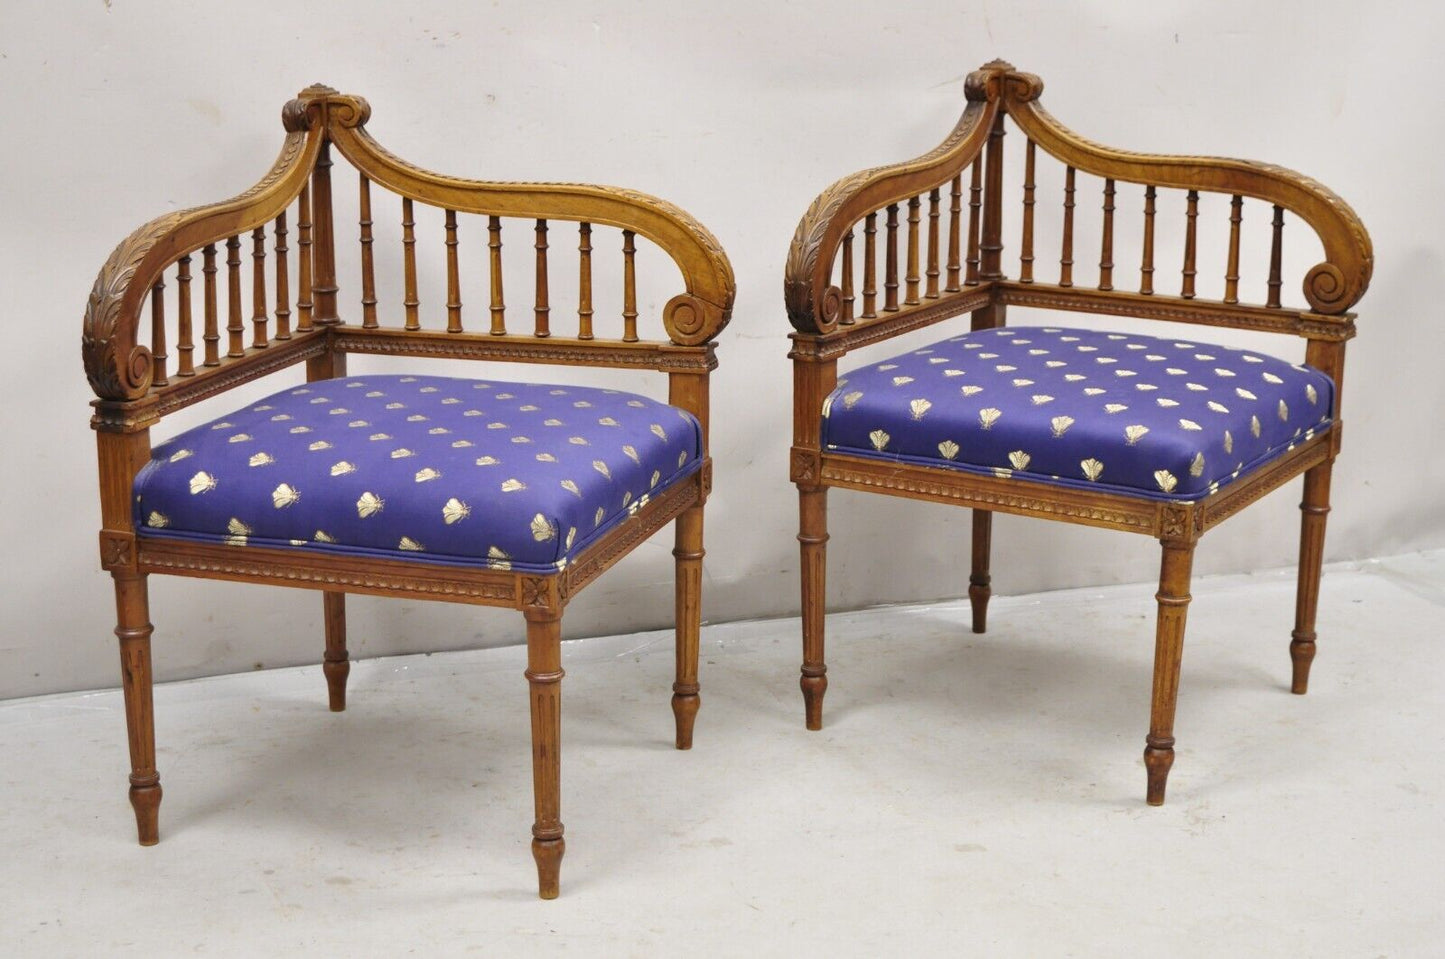 Antique French Louis XVI Style Carved Walnut Lyre Harp Corner Chairs - a Pair